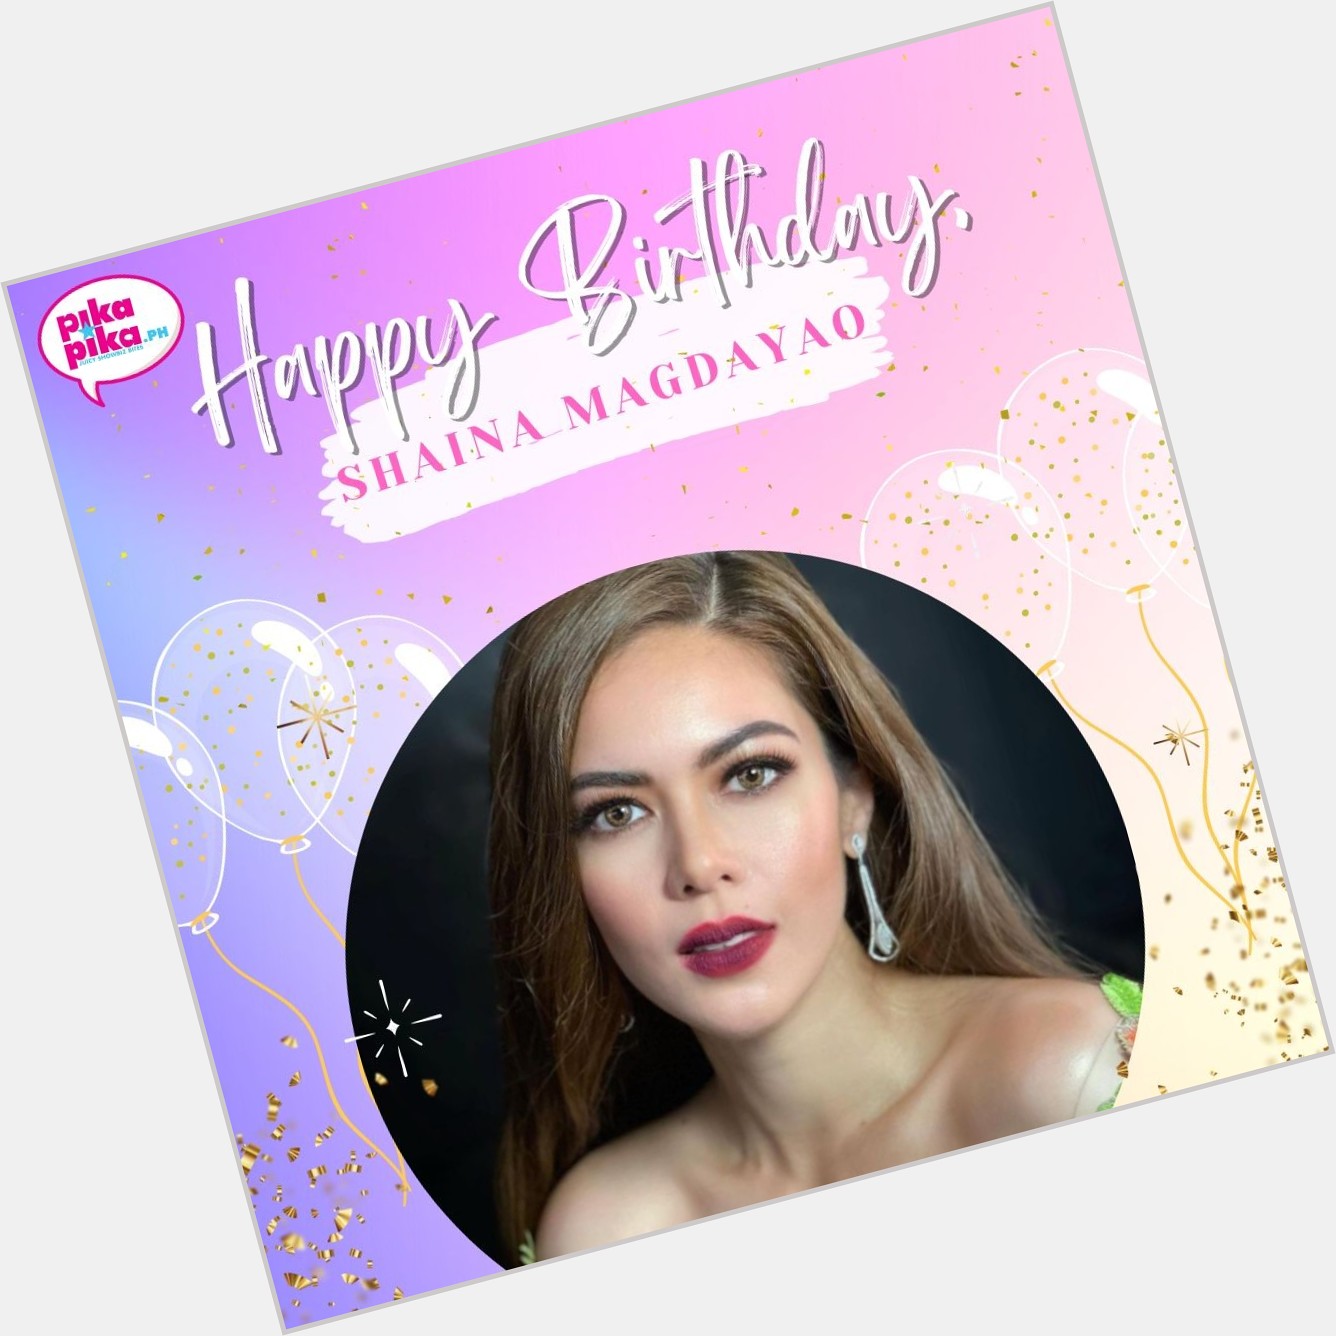 Happy birthday, Shaina Magdayao! May your special day be filled with love and cheers.   